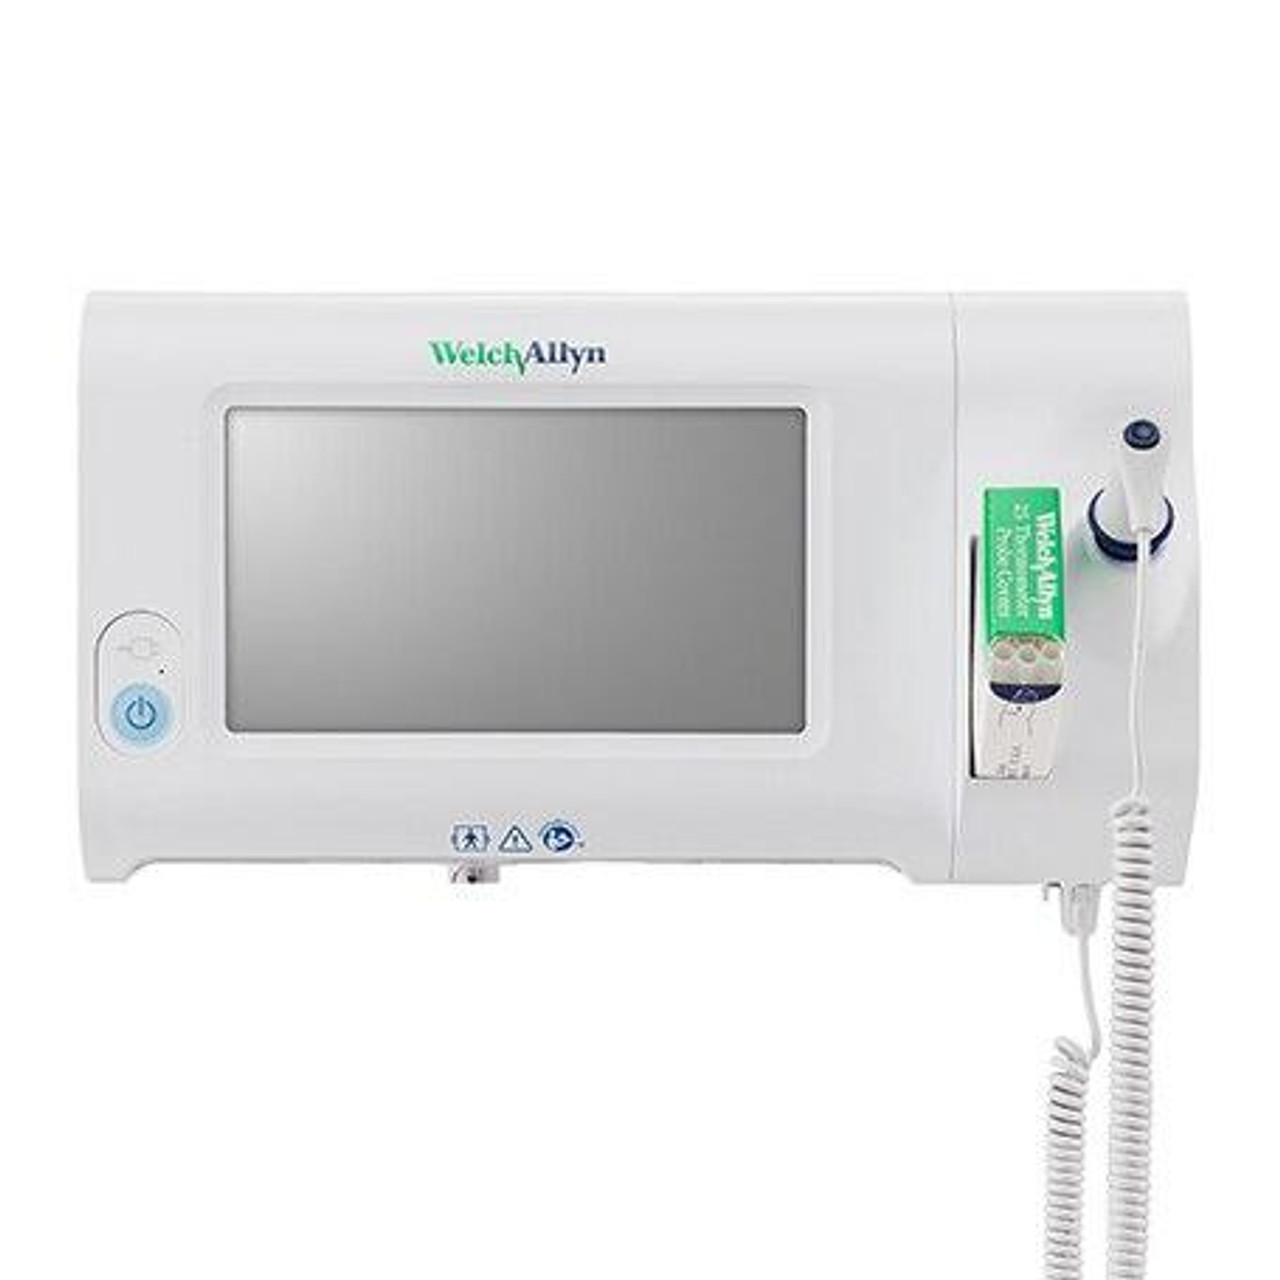 Welch Allyn Connex Spot Vital Sign Monitor With SureBP And Suretemp Plus  Thermometer - D